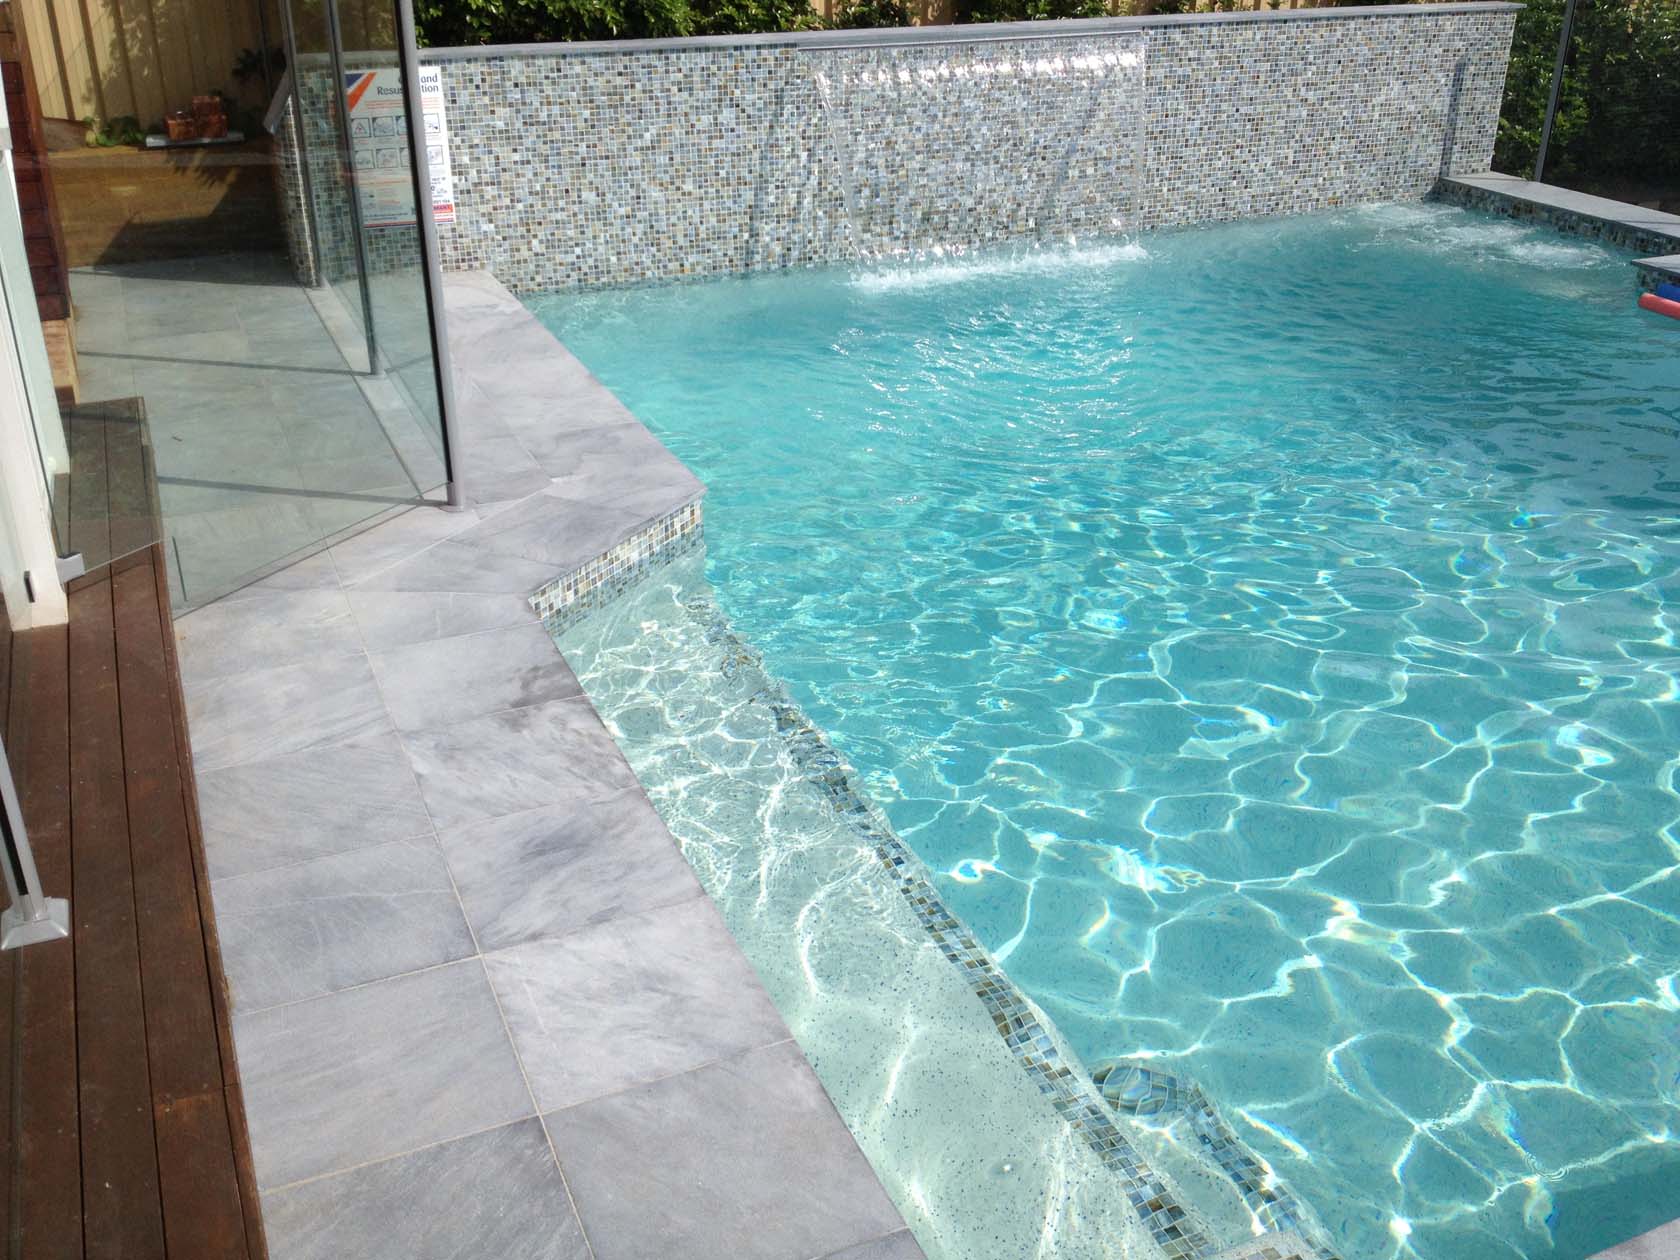 Parisian Blue Limestone pool coping and surround tiles